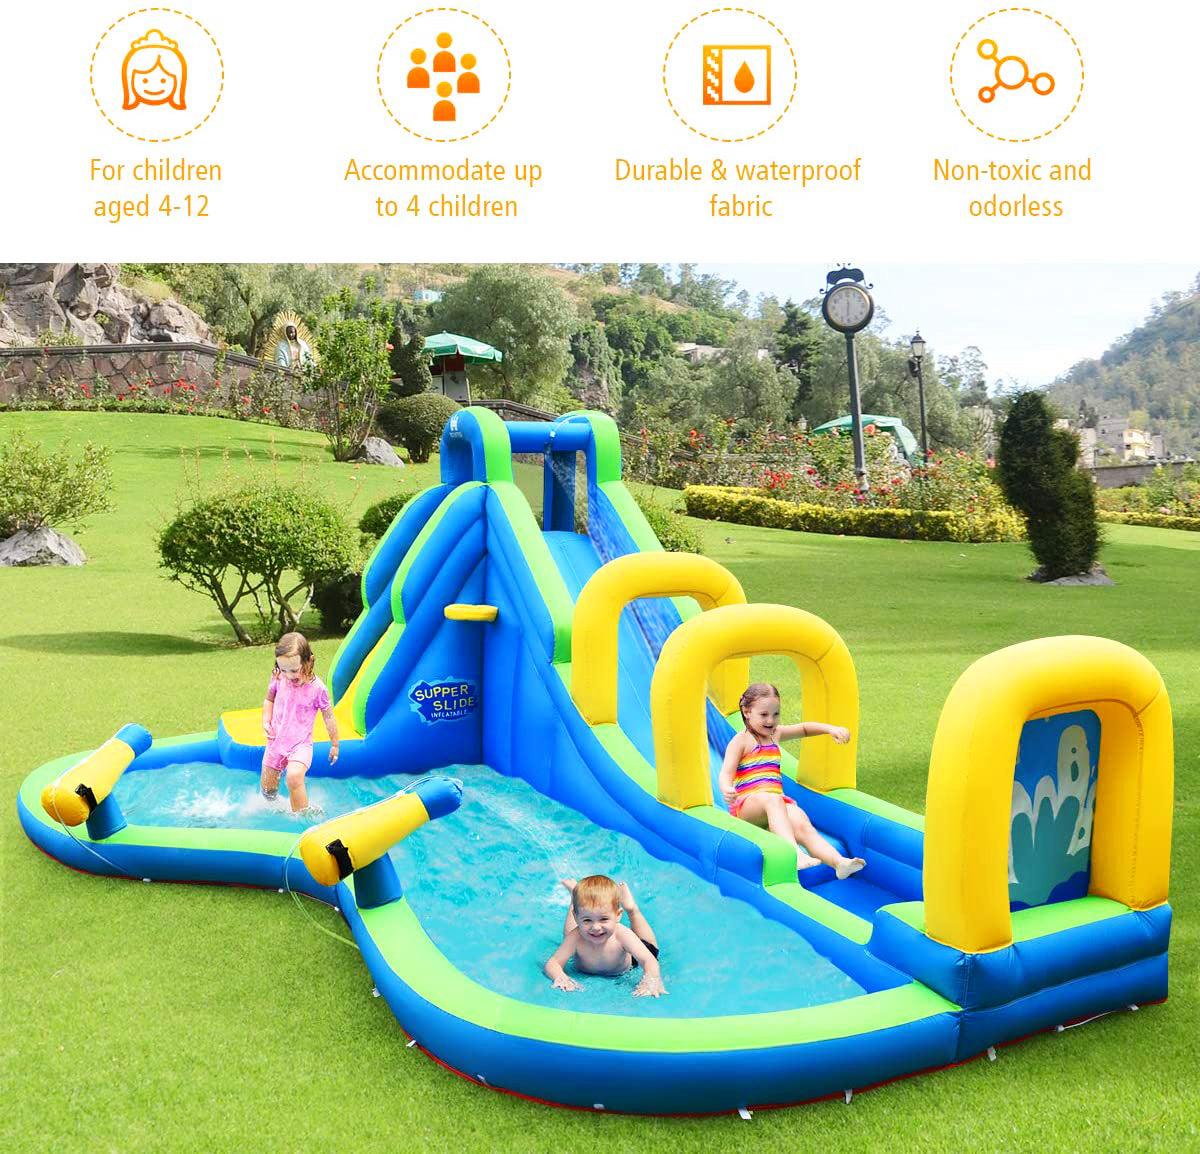 Deluxe Multi-Colored Inflatable Water Park with Slides, Water Blaster and Climbing Wall - Blower and Carry Case Included